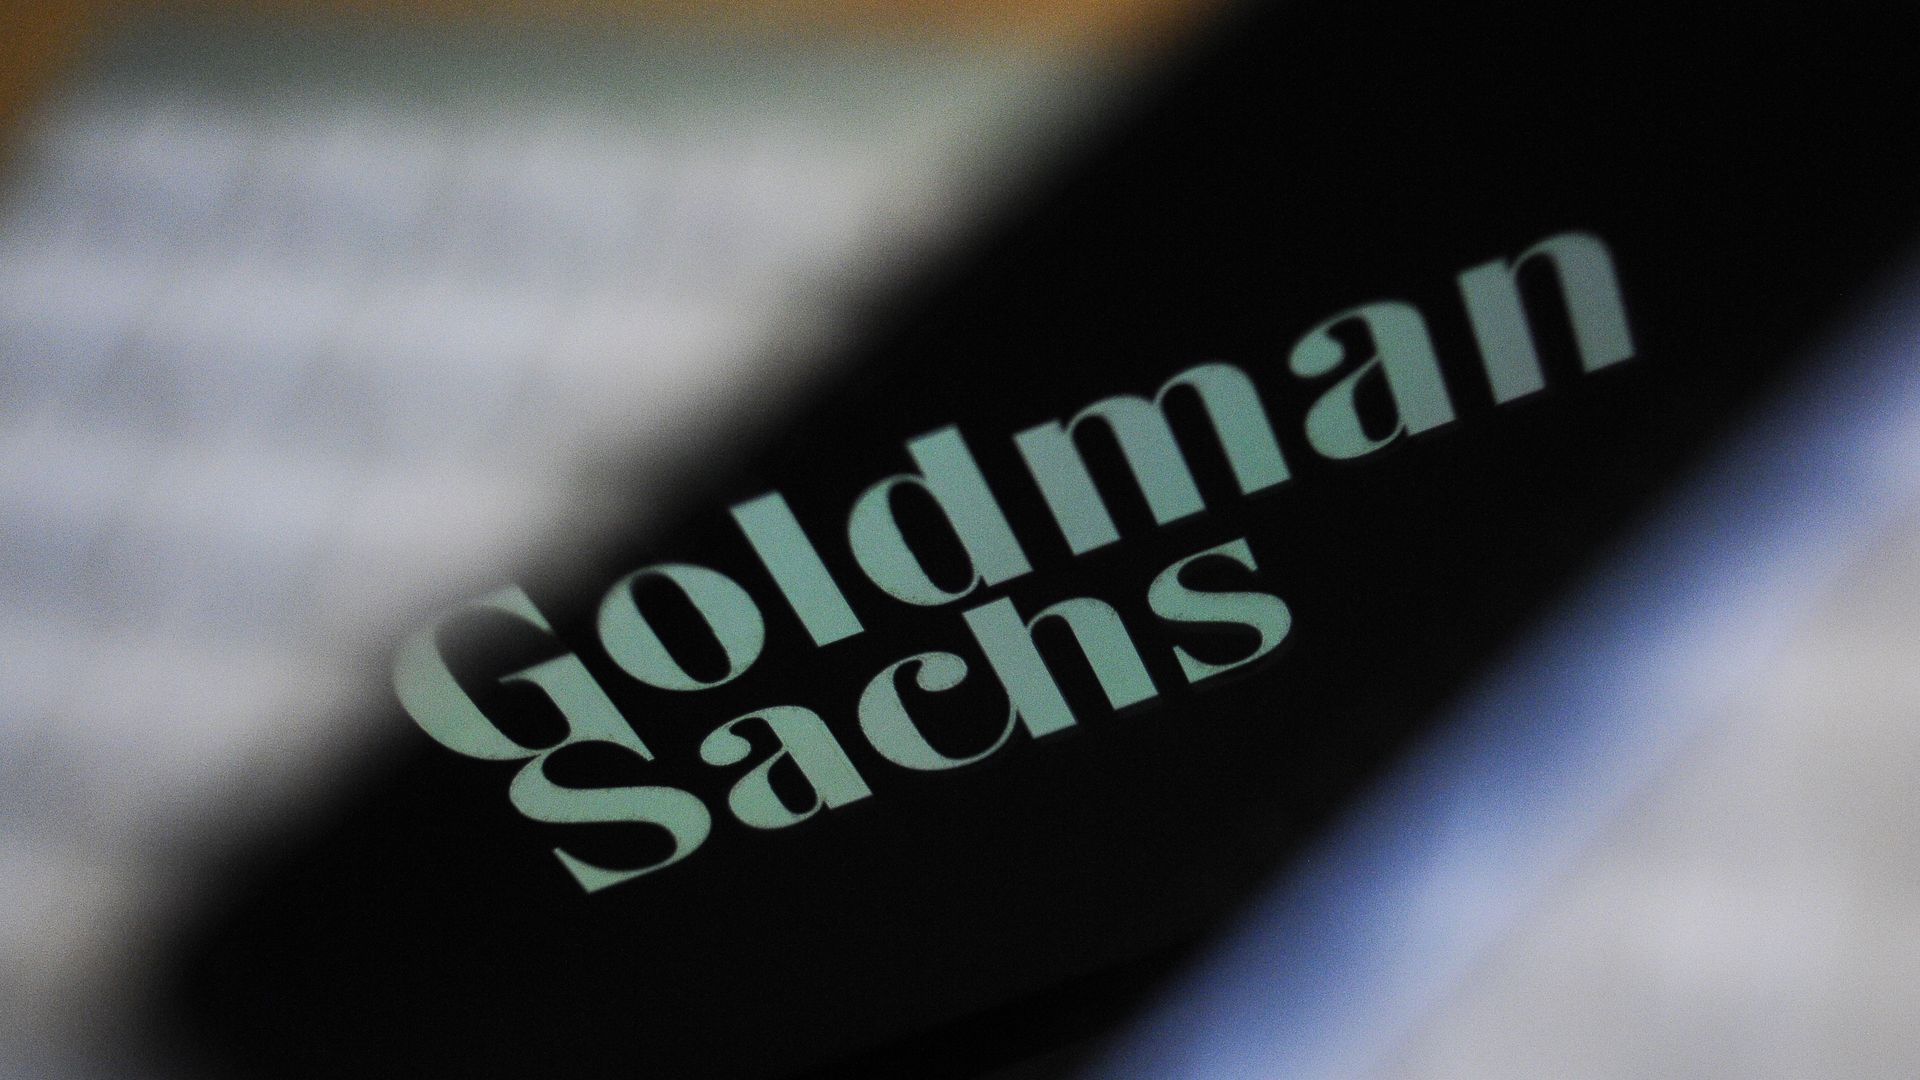 The Goldman Sachs bank logo is seen reflected on the screen of a mobile phone.